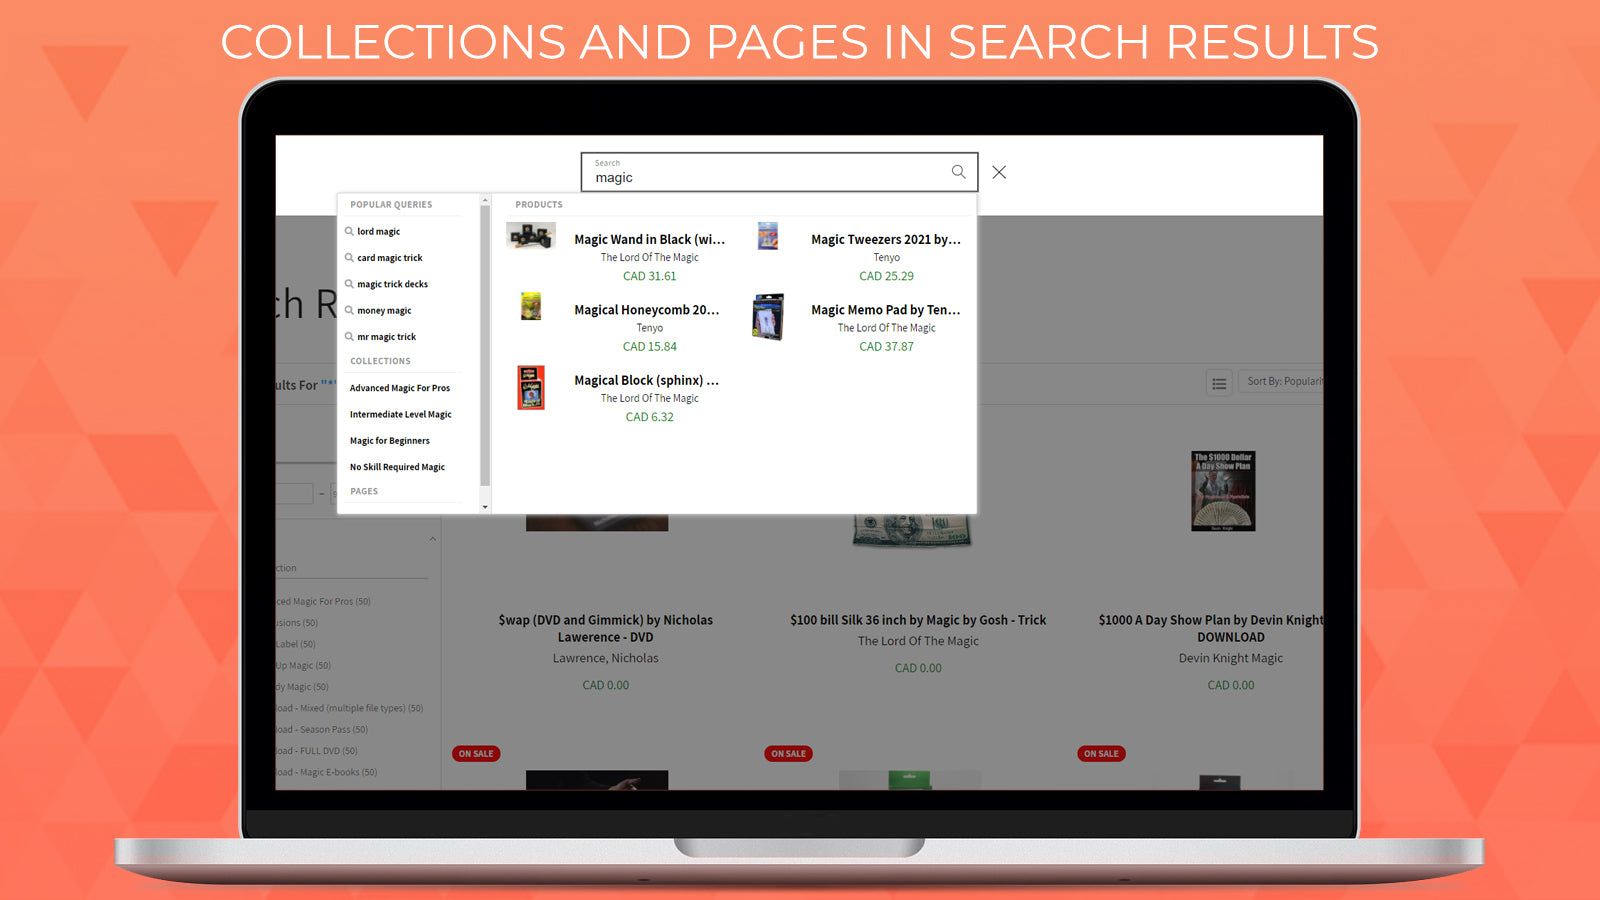 pages and collections search on lotm